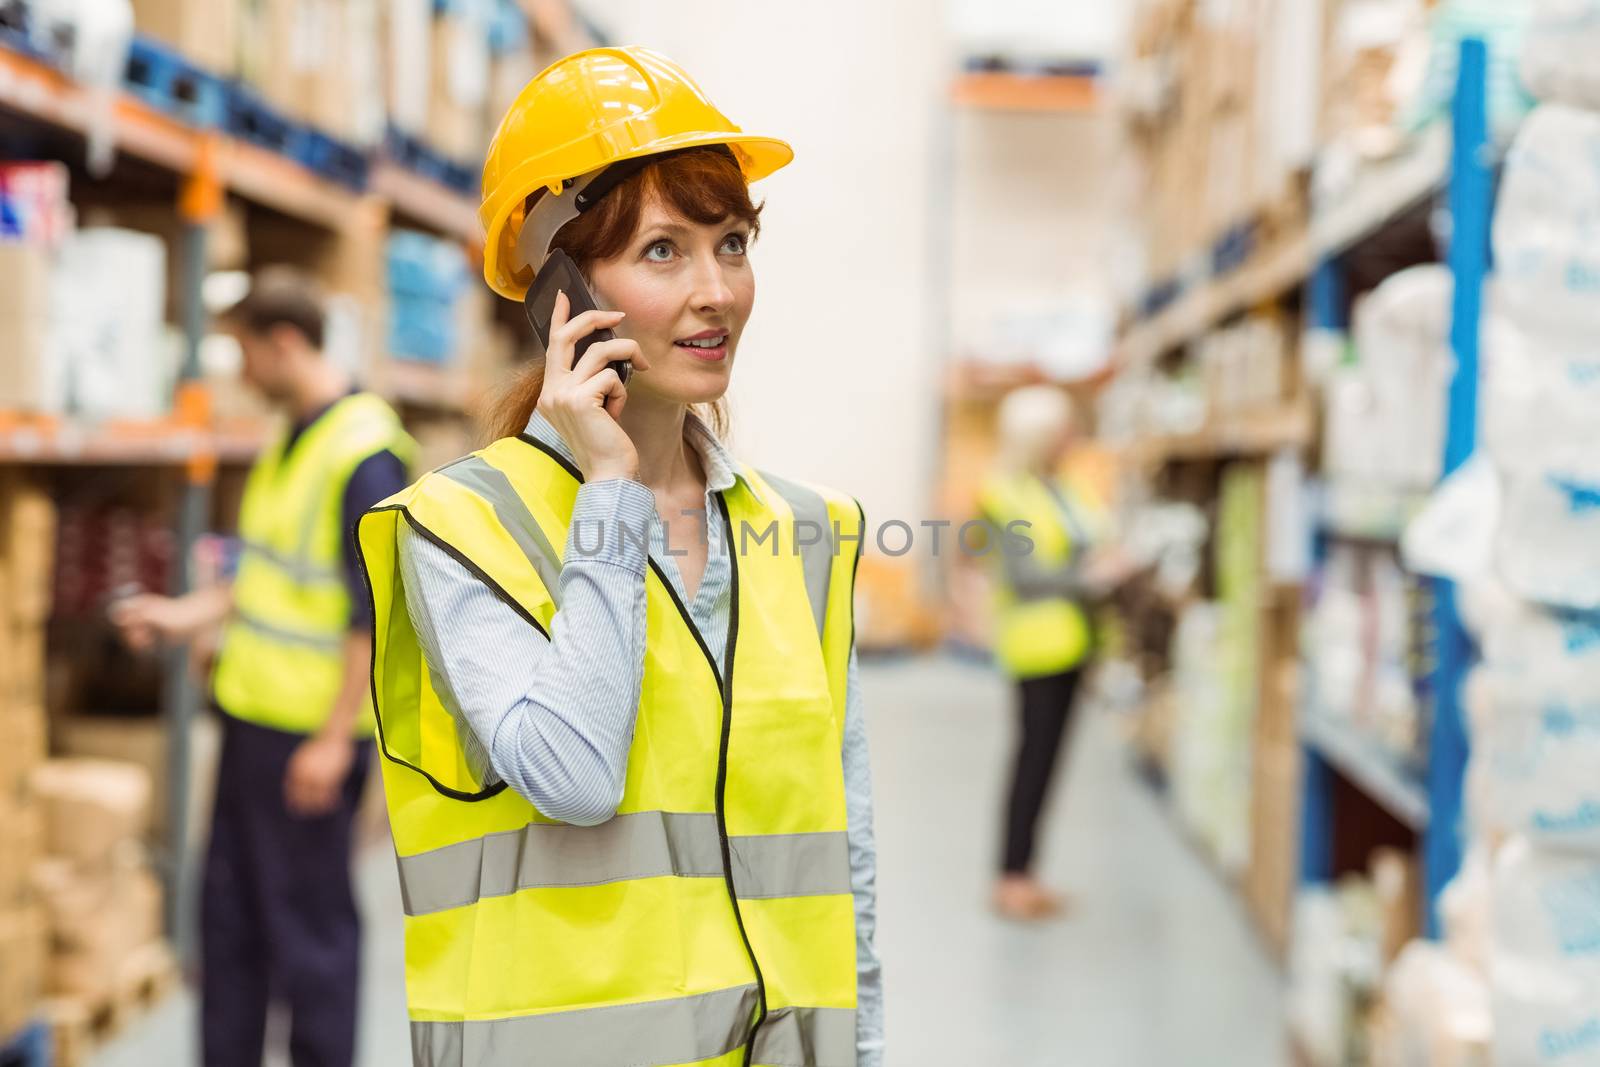 Warehouse manager talking on the phone looking around in a large warehouse